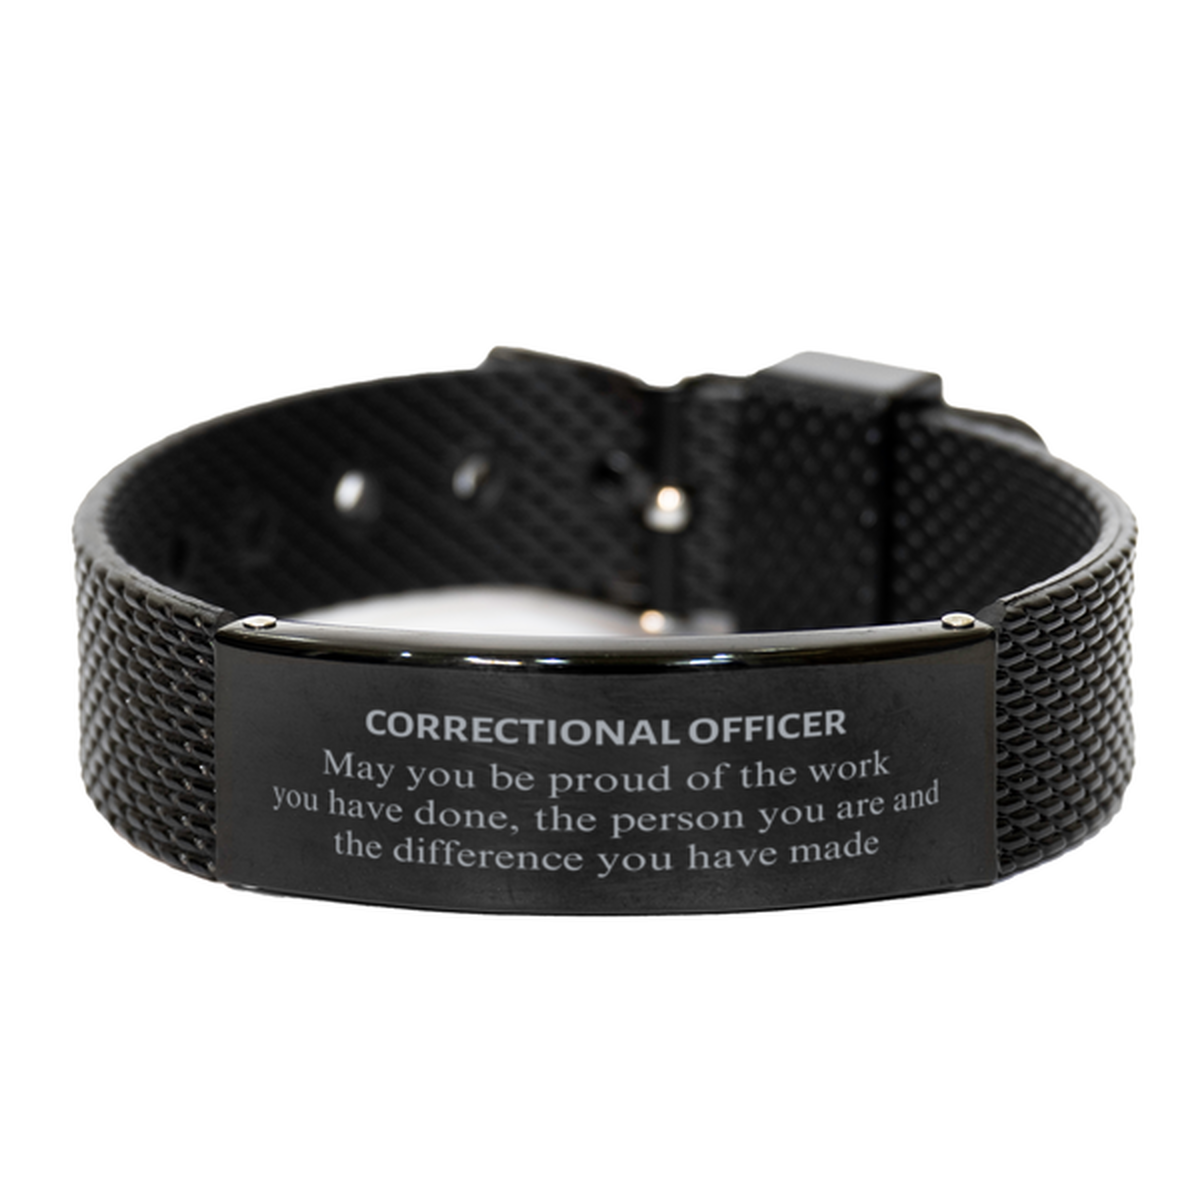 Correctional Officer May you be proud of the work you have done, Retirement Correctional Officer Black Shark Mesh Bracelet for Colleague Appreciation Gifts Amazing for Correctional Officer